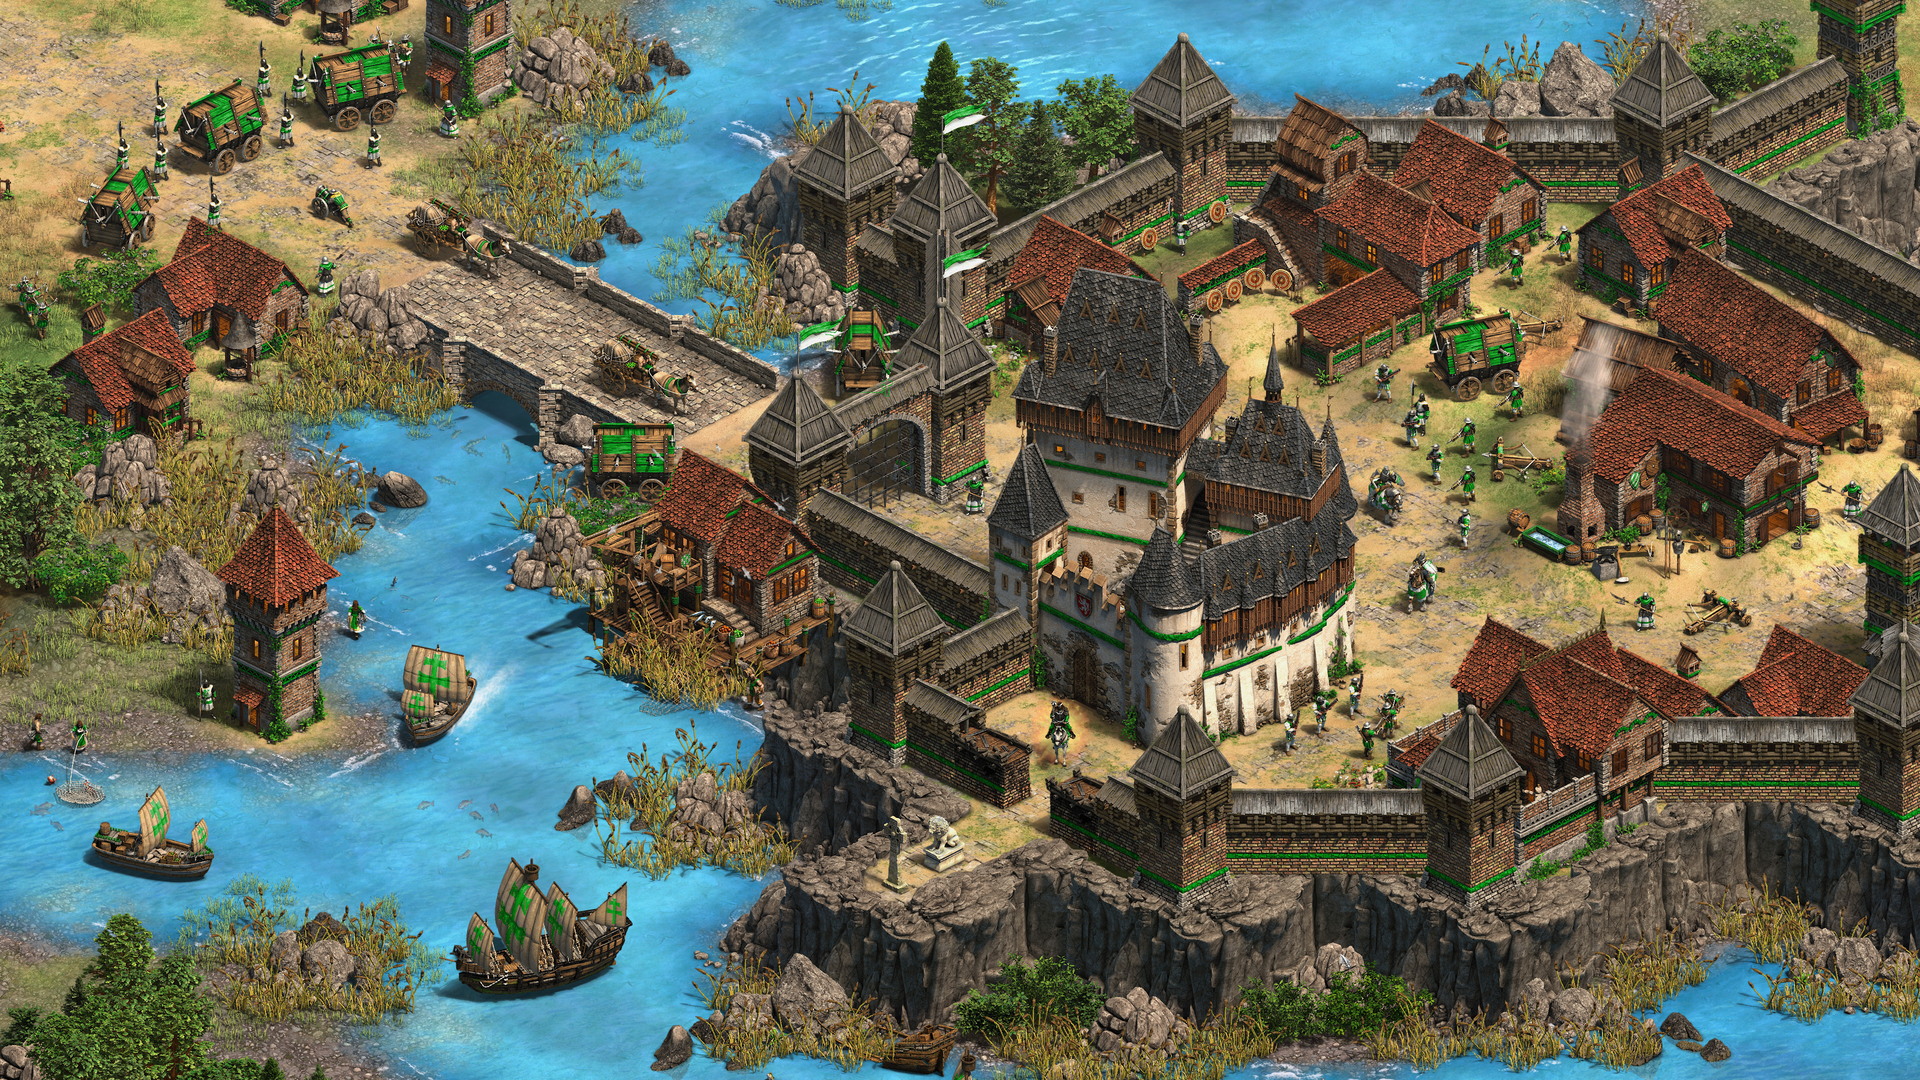 Age of Empires II: Definitive Edition - Dawn of the Dukes - screenshot 1